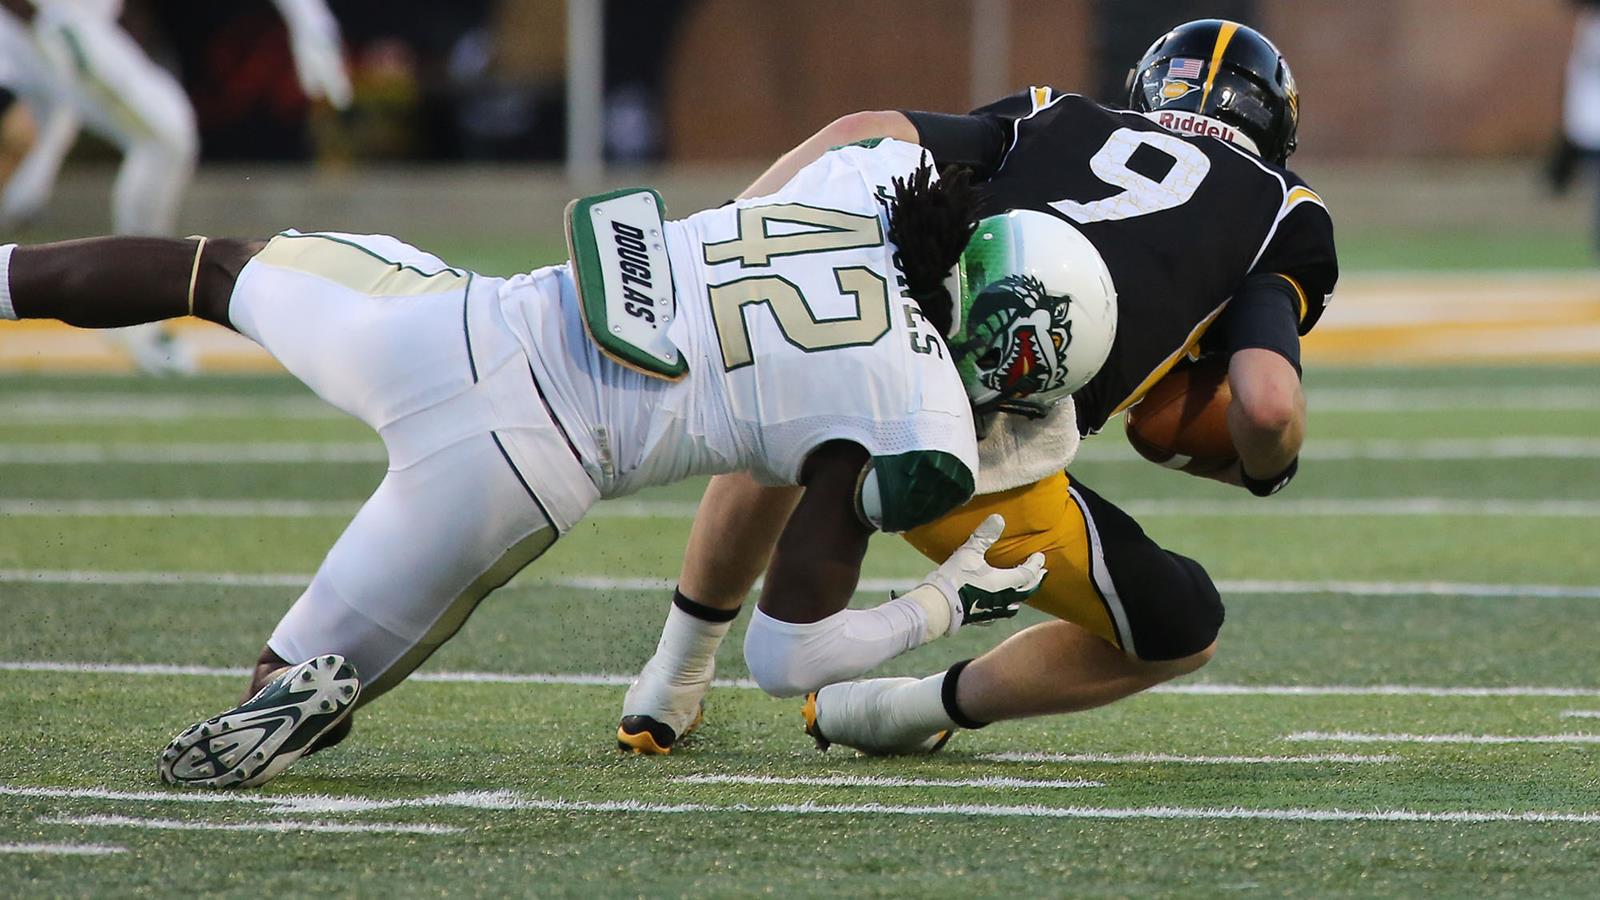 UAB Travels to Hattiesburg to Renew Southern Miss Rivalry